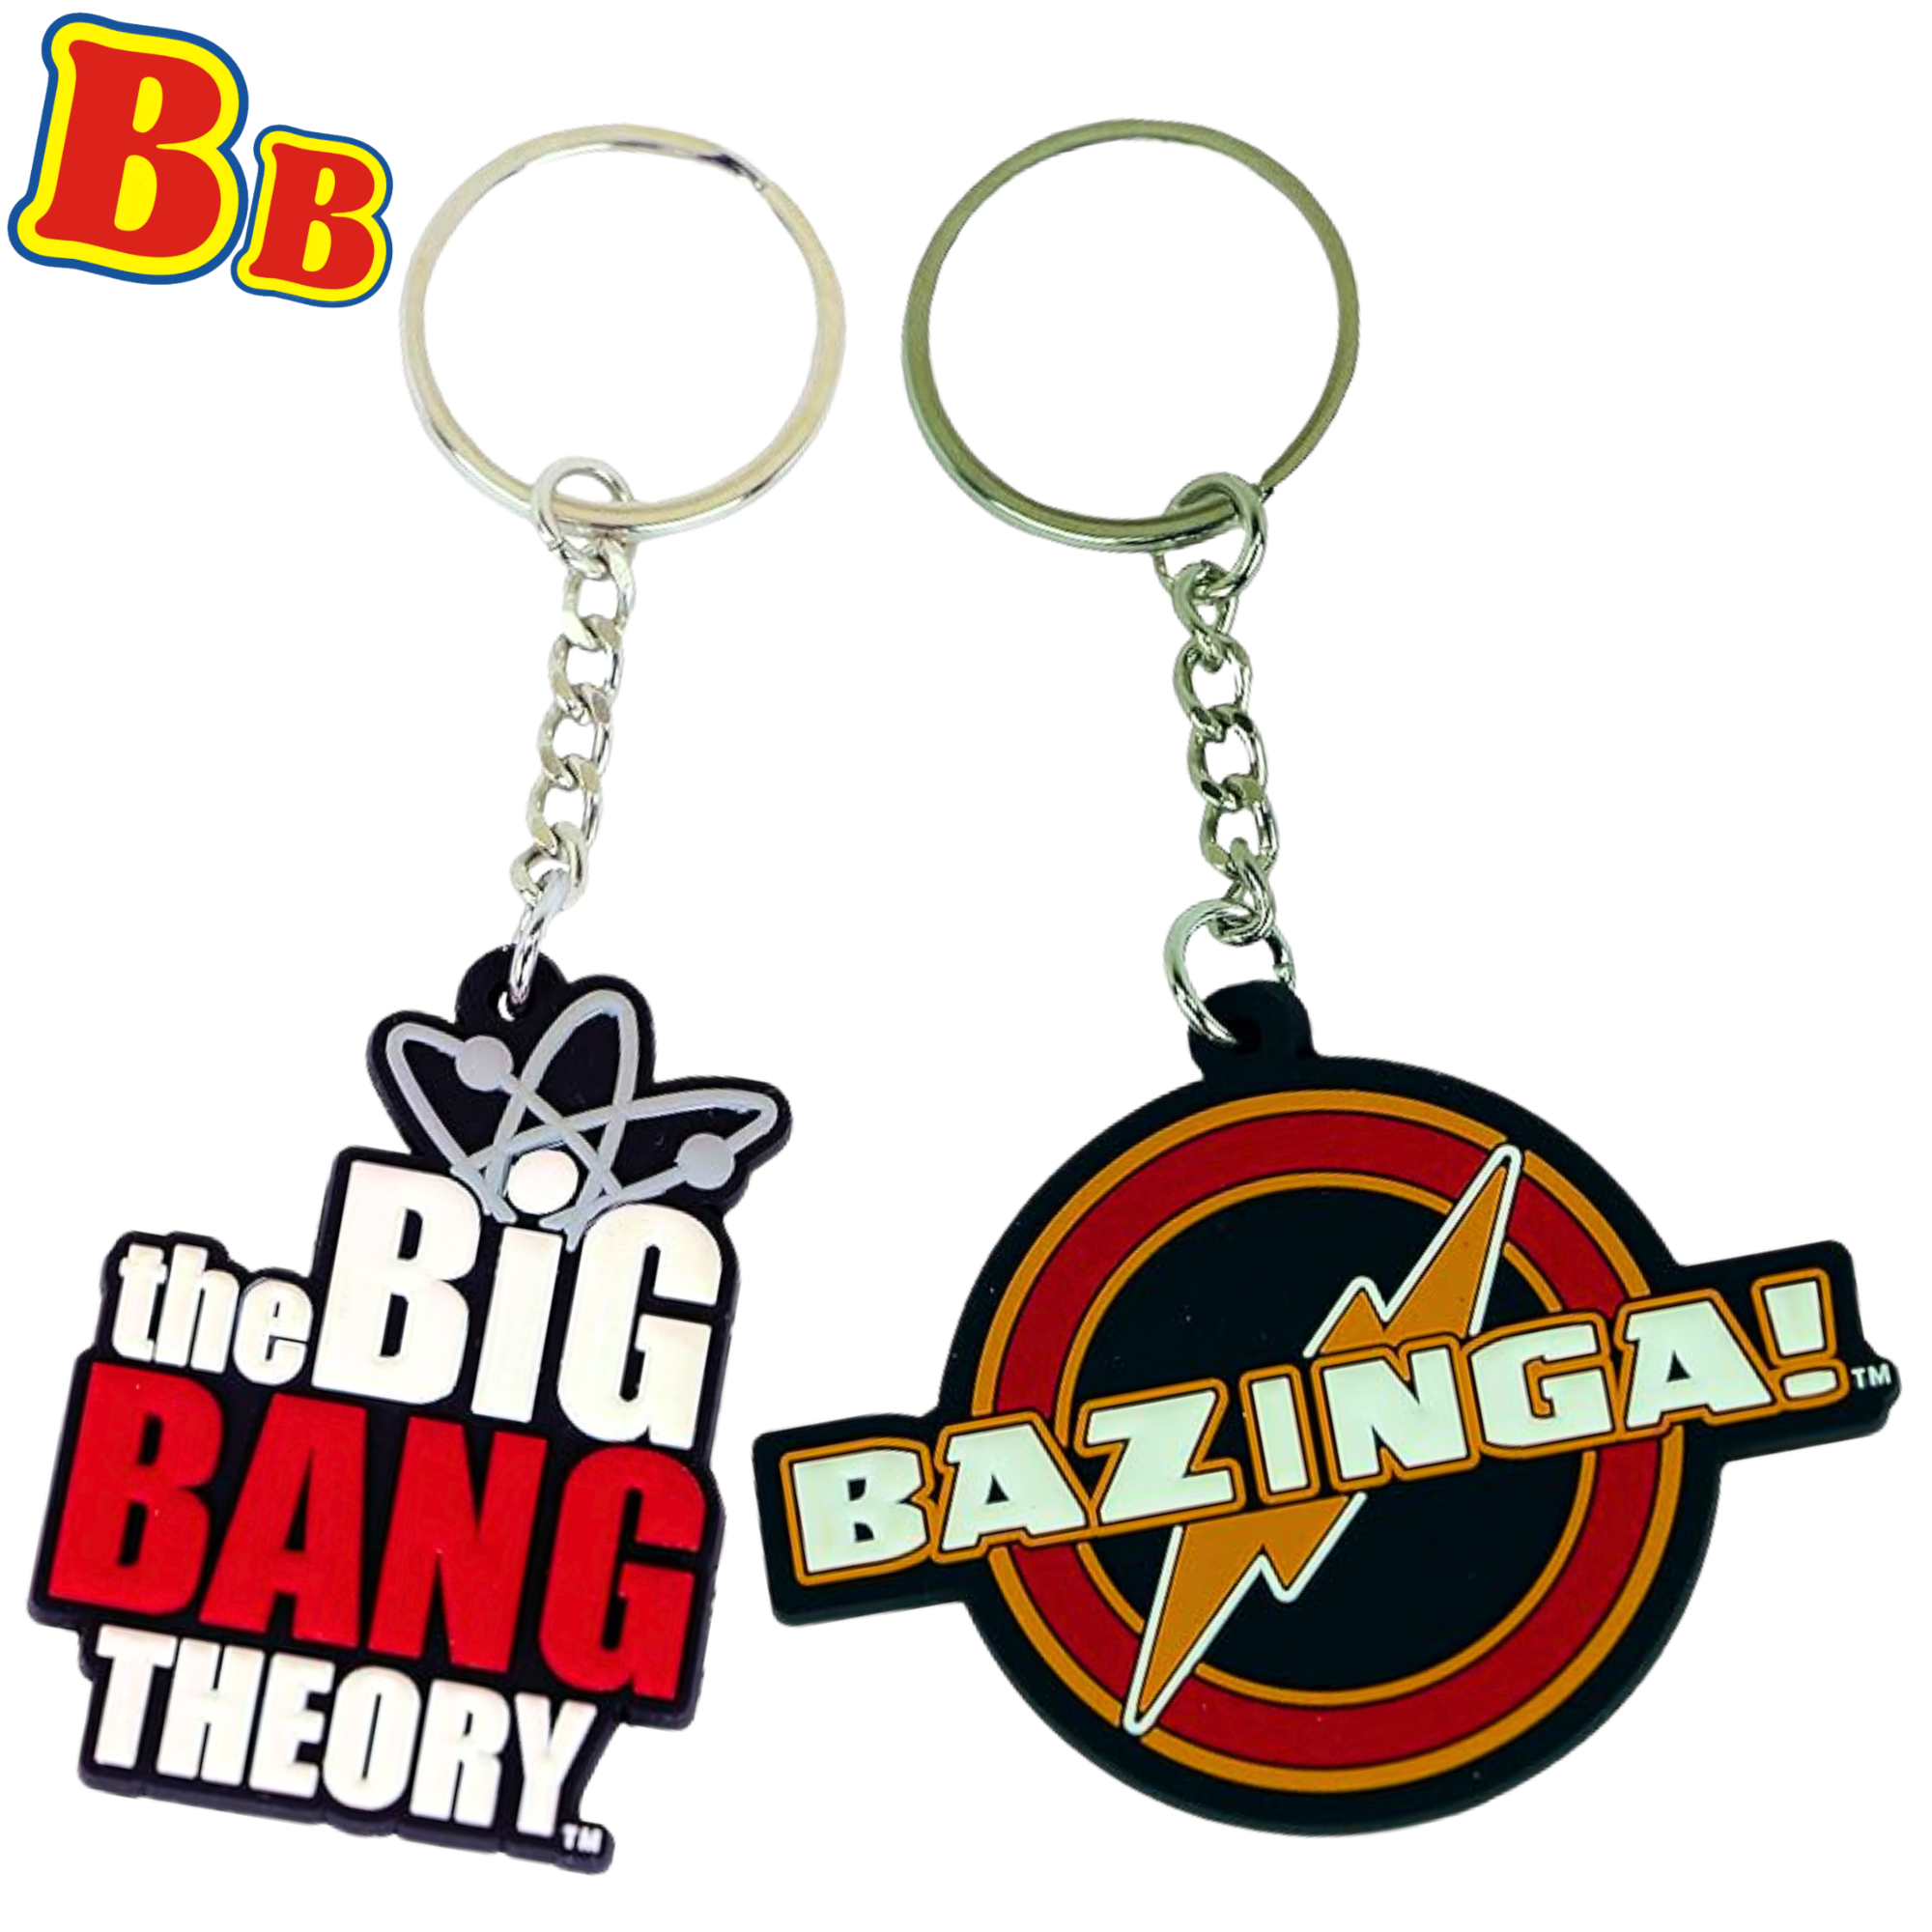 The Big Bang Theory Laser Cut Rubber Keychain Twin Pack - Includes Bazinga and Logo Designs